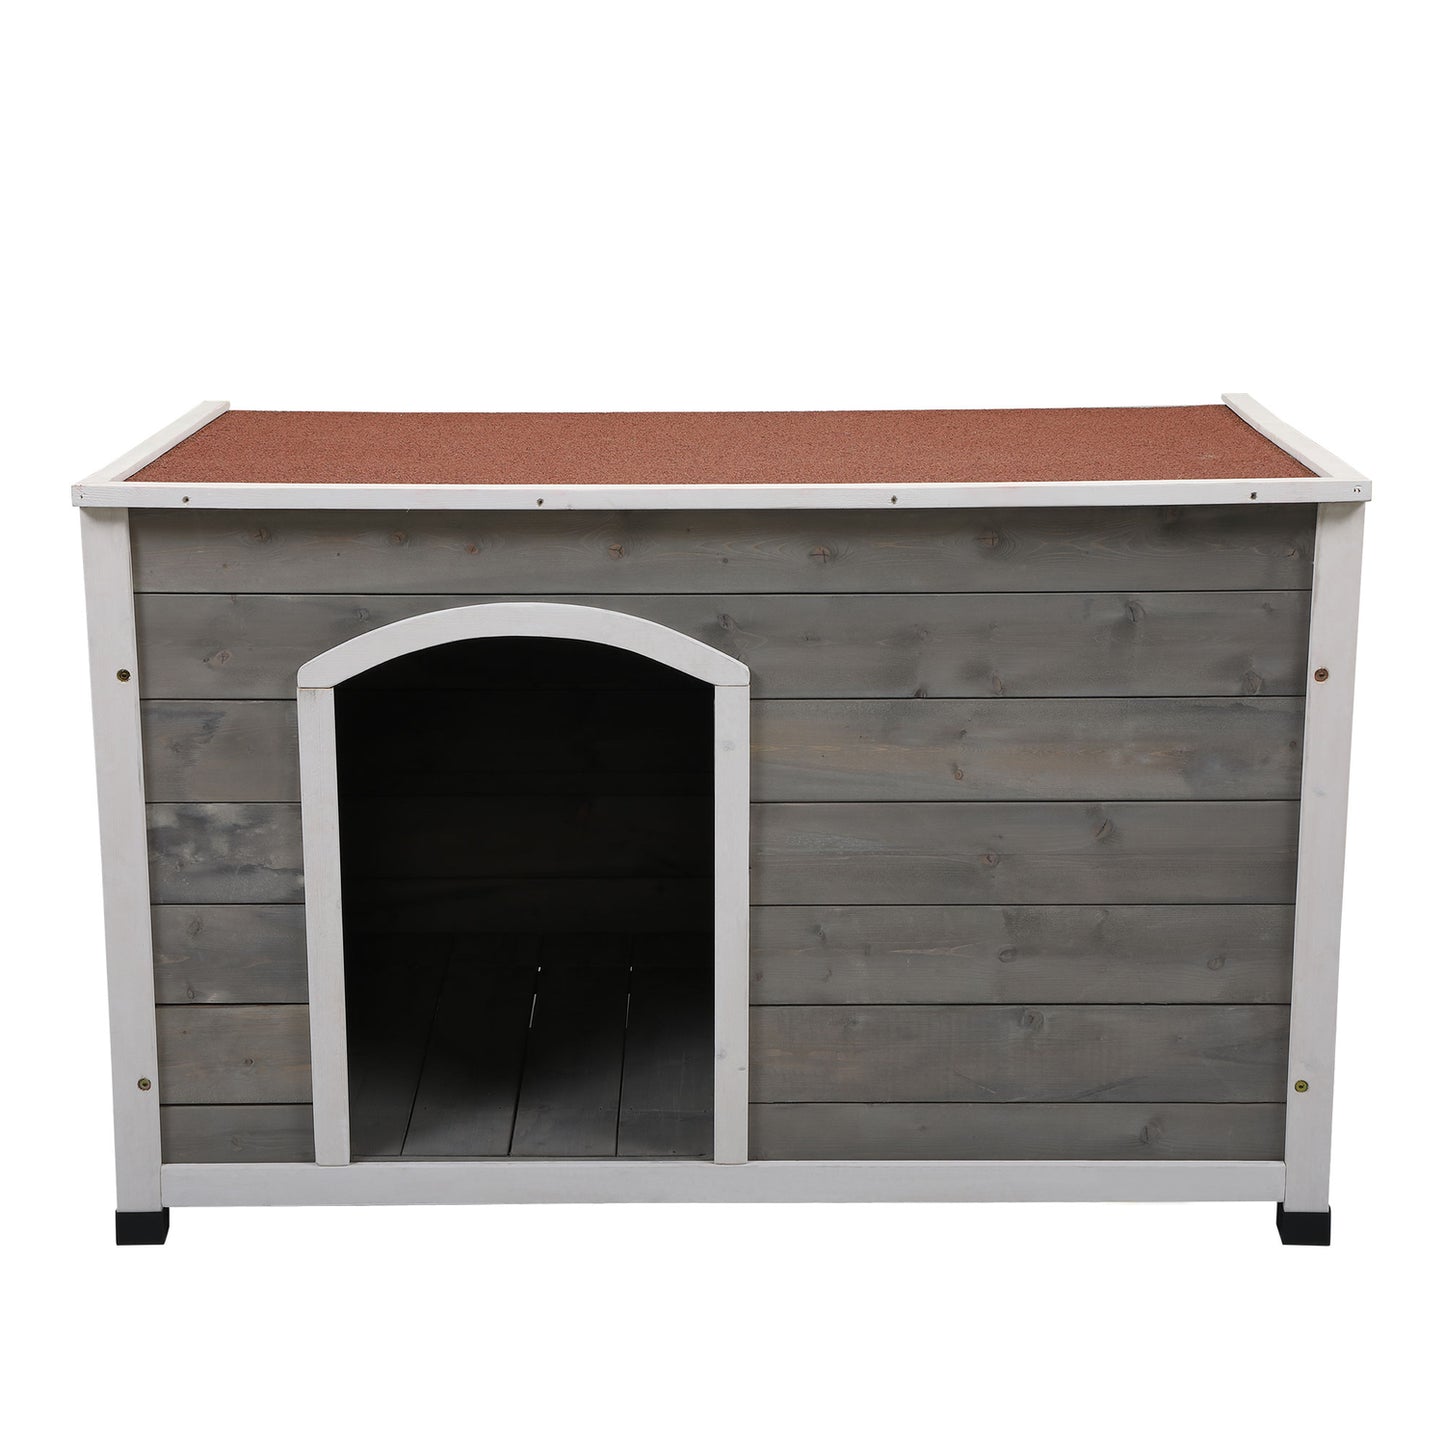 Atotoa Wooden Dog House Outdoor & Indoor Large Pet Shelter Pet House Home Extreme Weather Resistant Wood Log Cabin Dog House